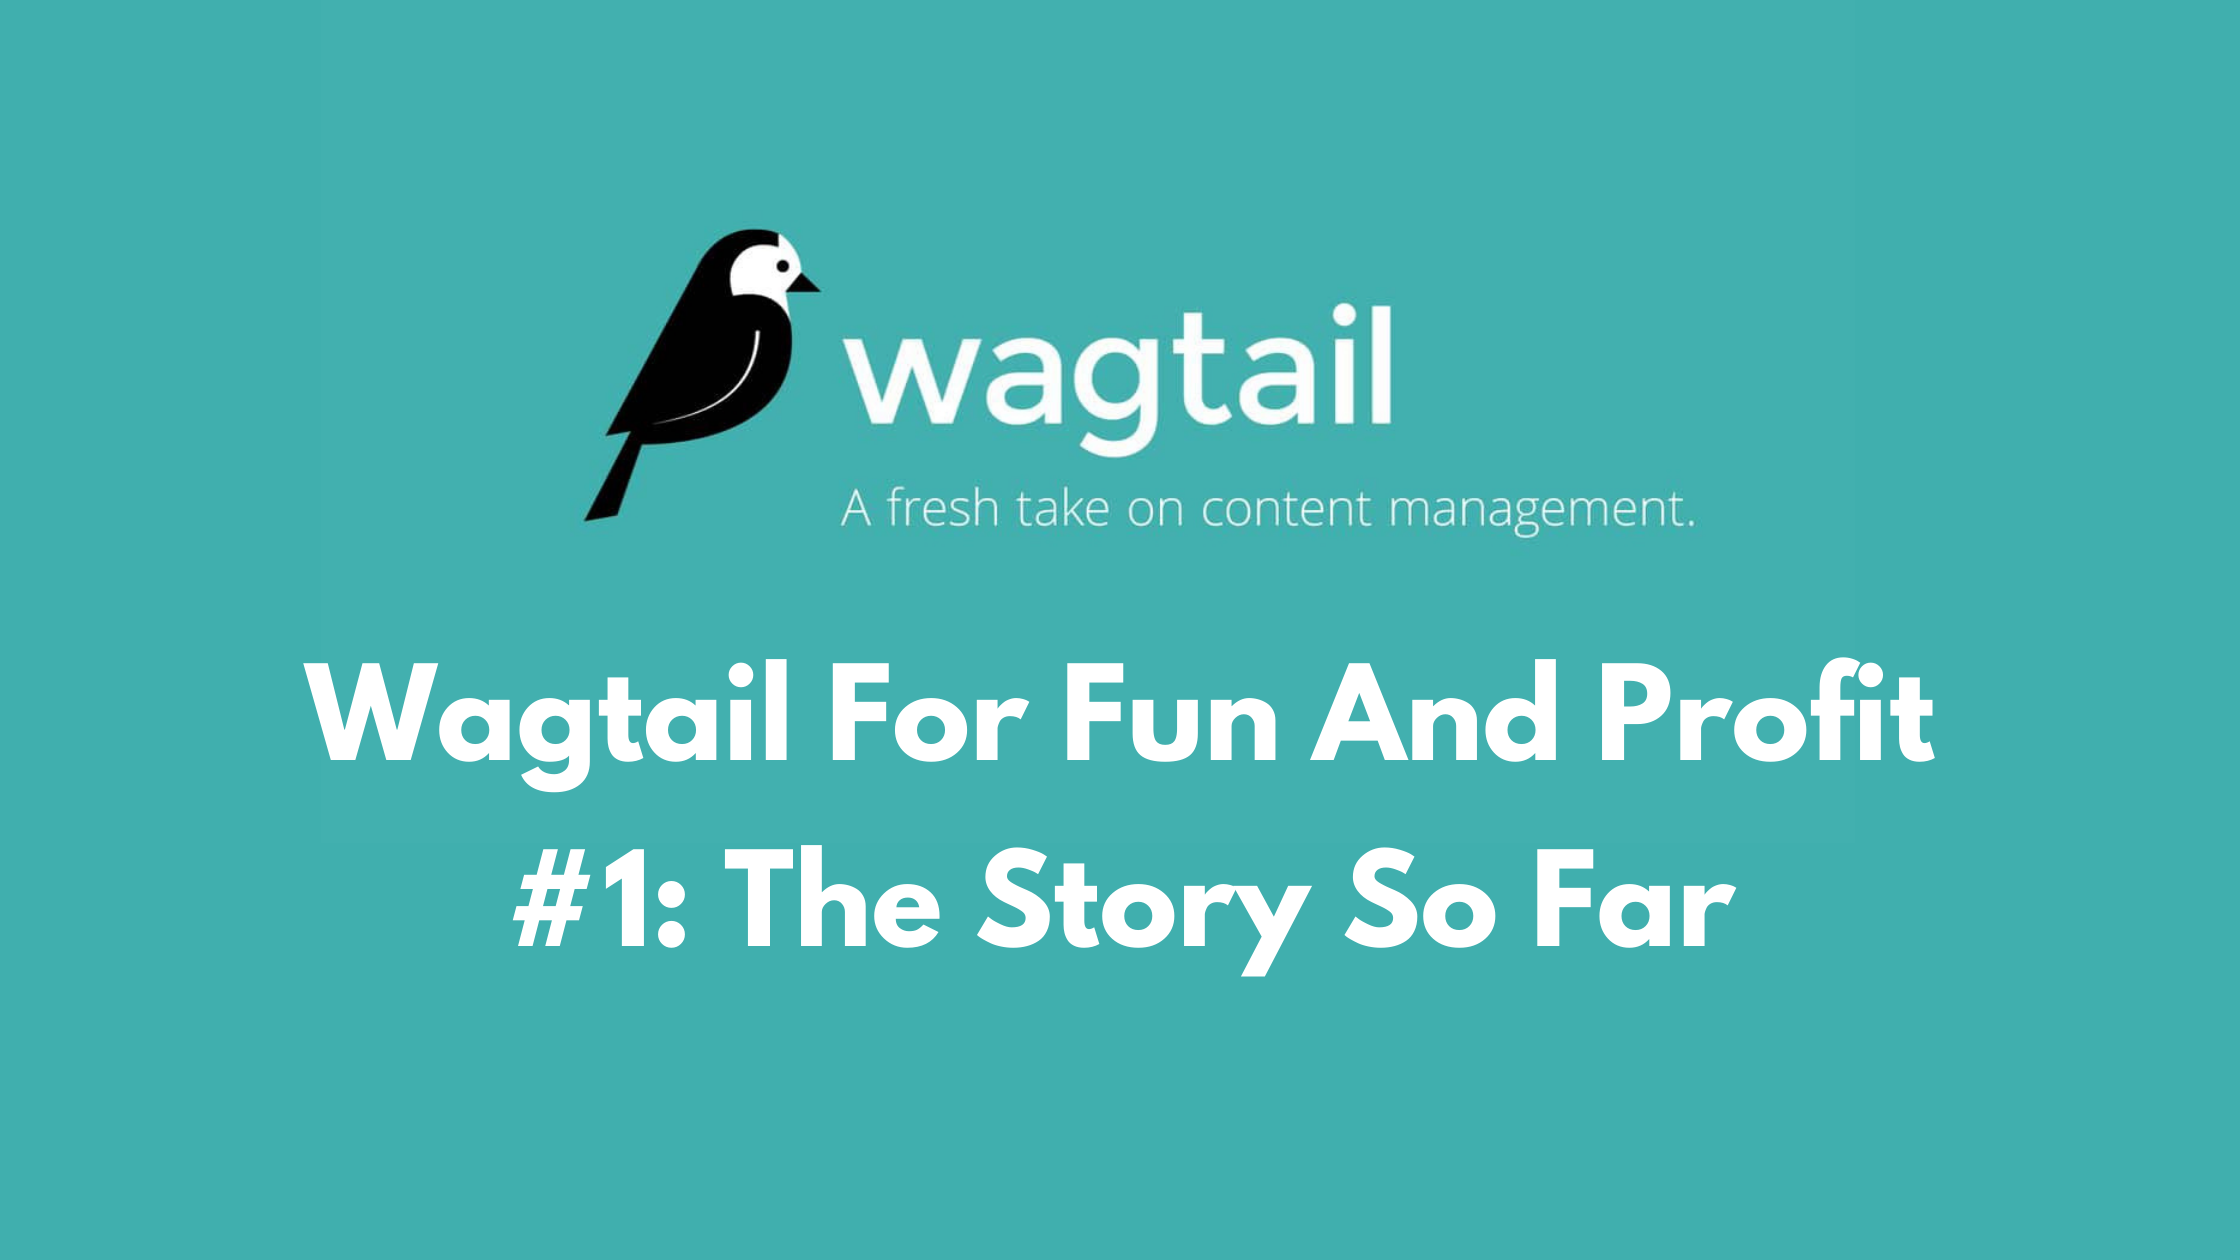 Wagtail For Fun And Profit #1 - Story So Far!